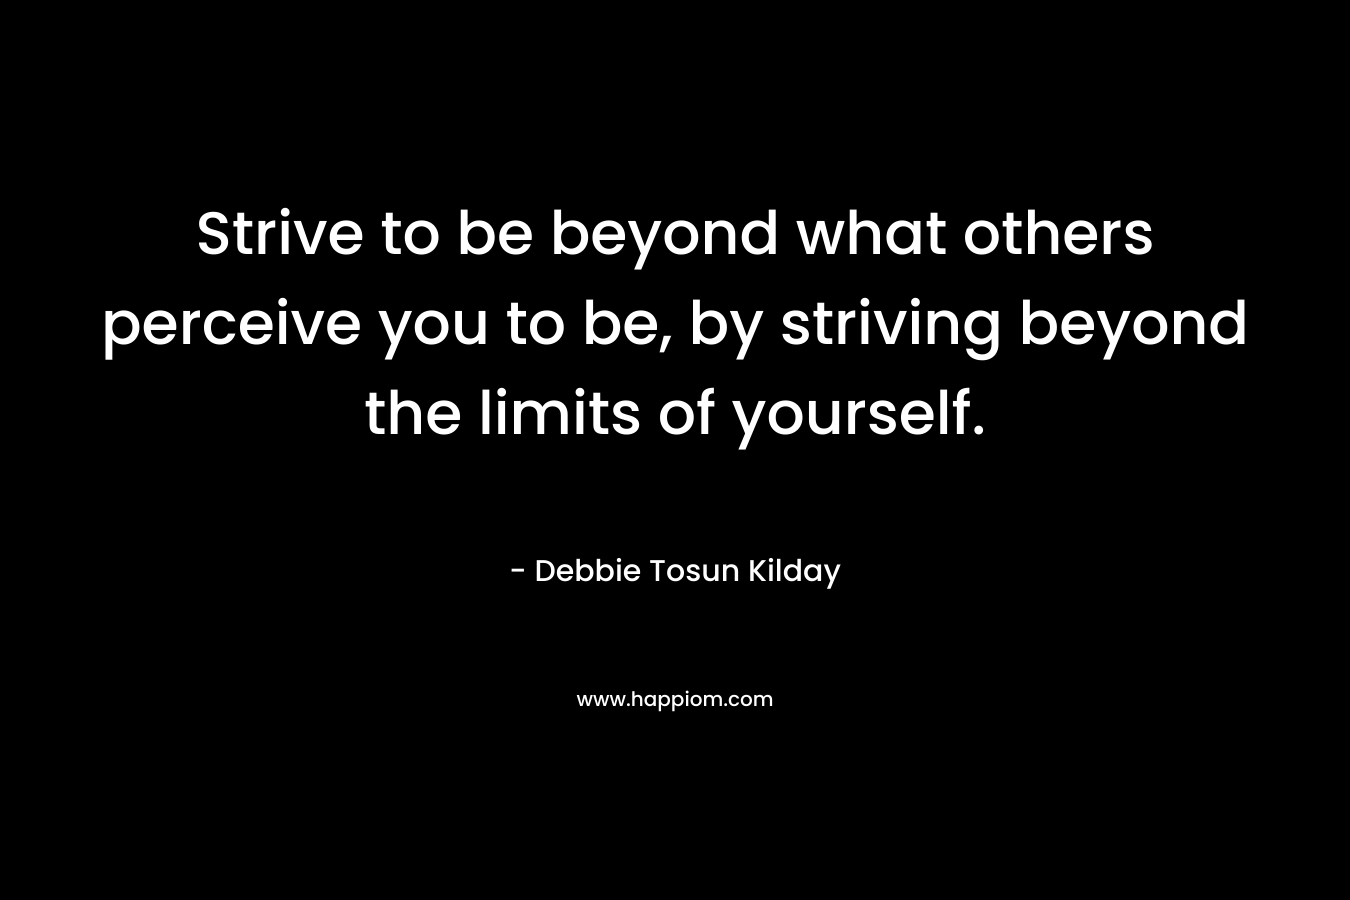 Strive to be beyond what others perceive you to be, by striving beyond the limits of yourself. – Debbie Tosun Kilday